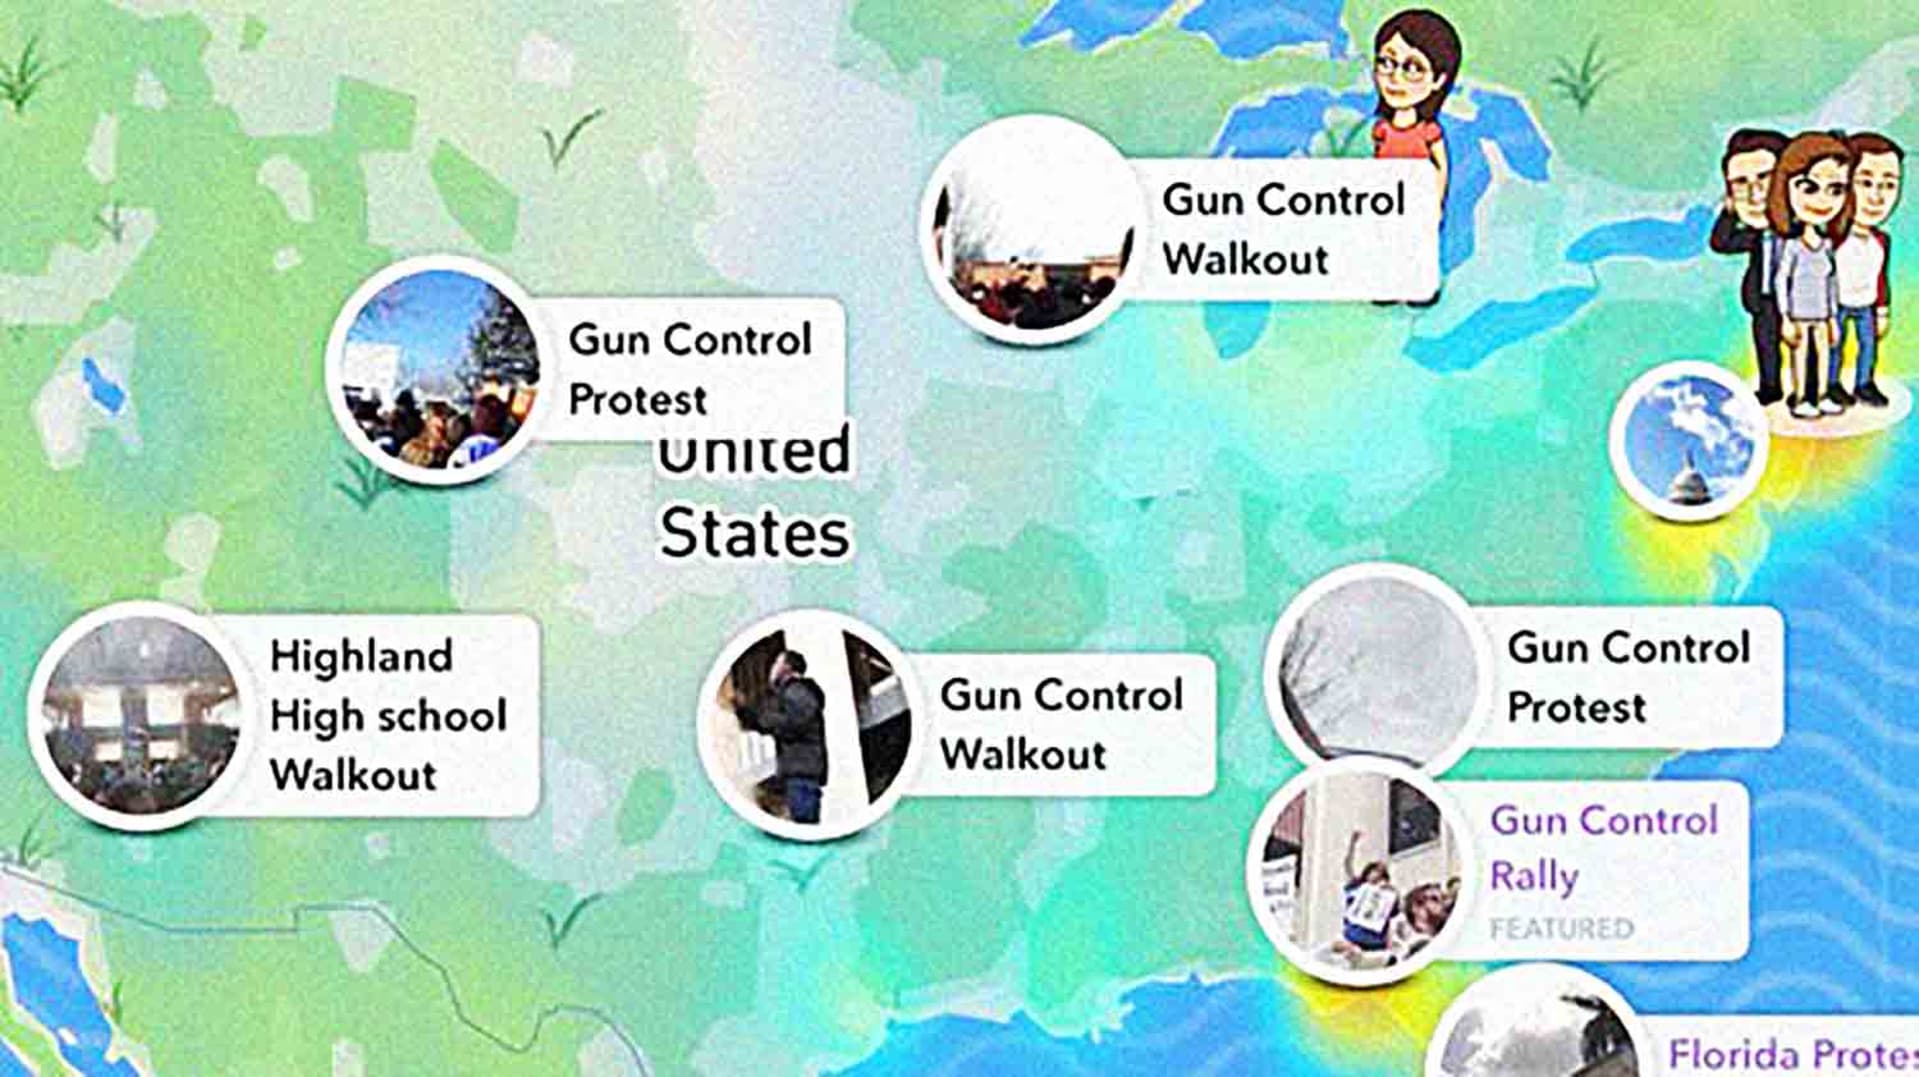 Snapchat’s “Snap Maps” visualized yesterday’s school walkouts protesting gun violence